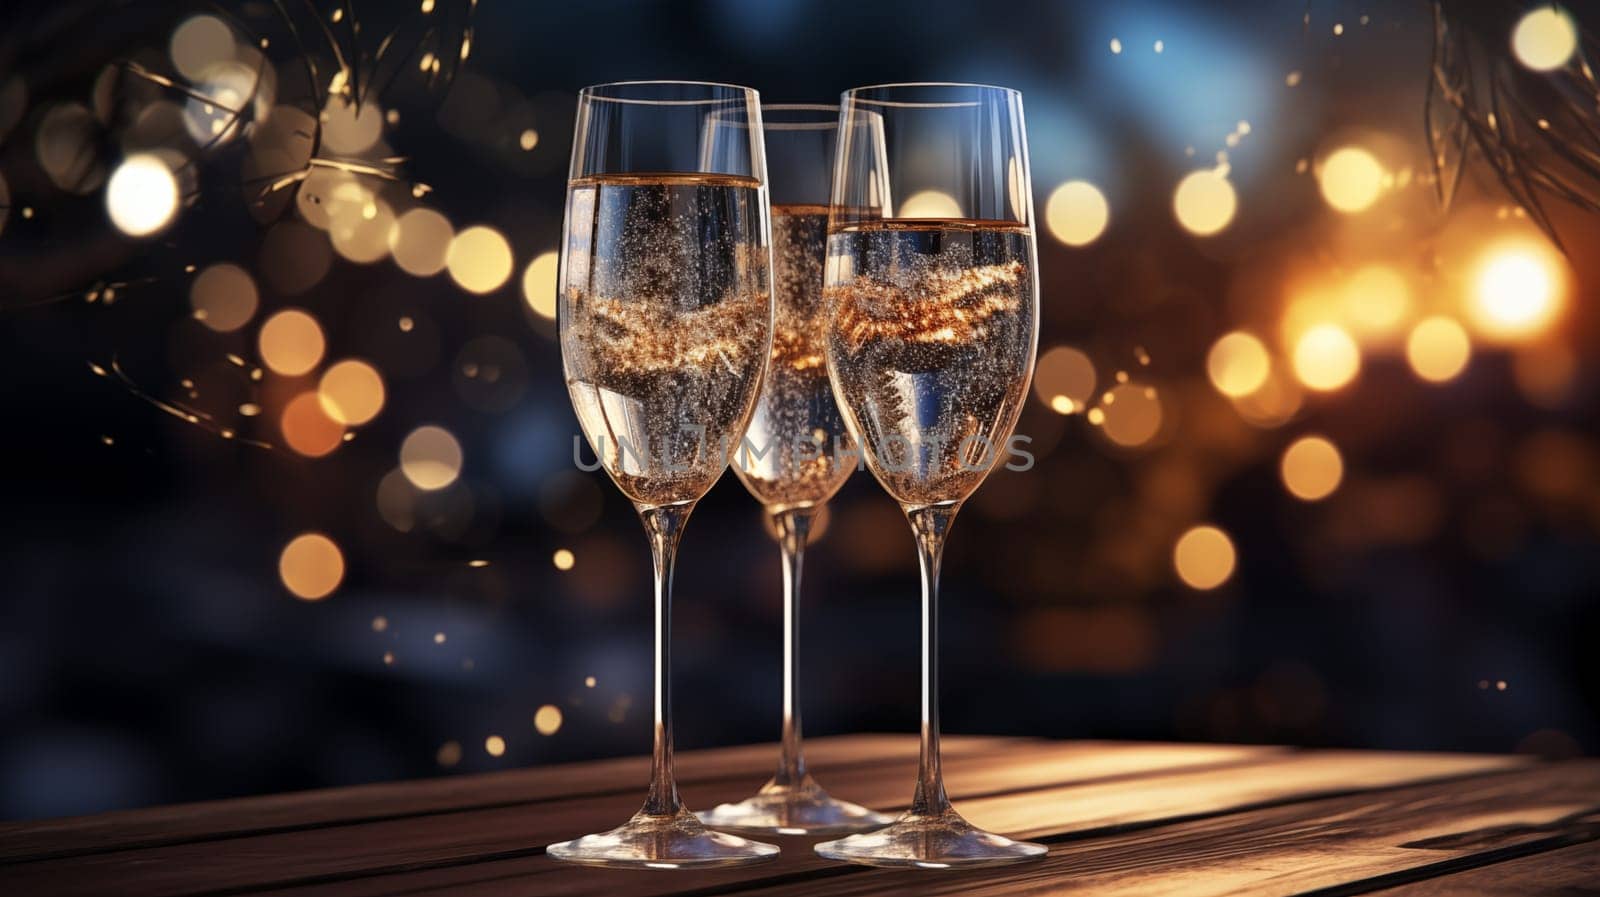 Three glasses of champagne with particles of gold stand on the table in the evening, by Zakharova